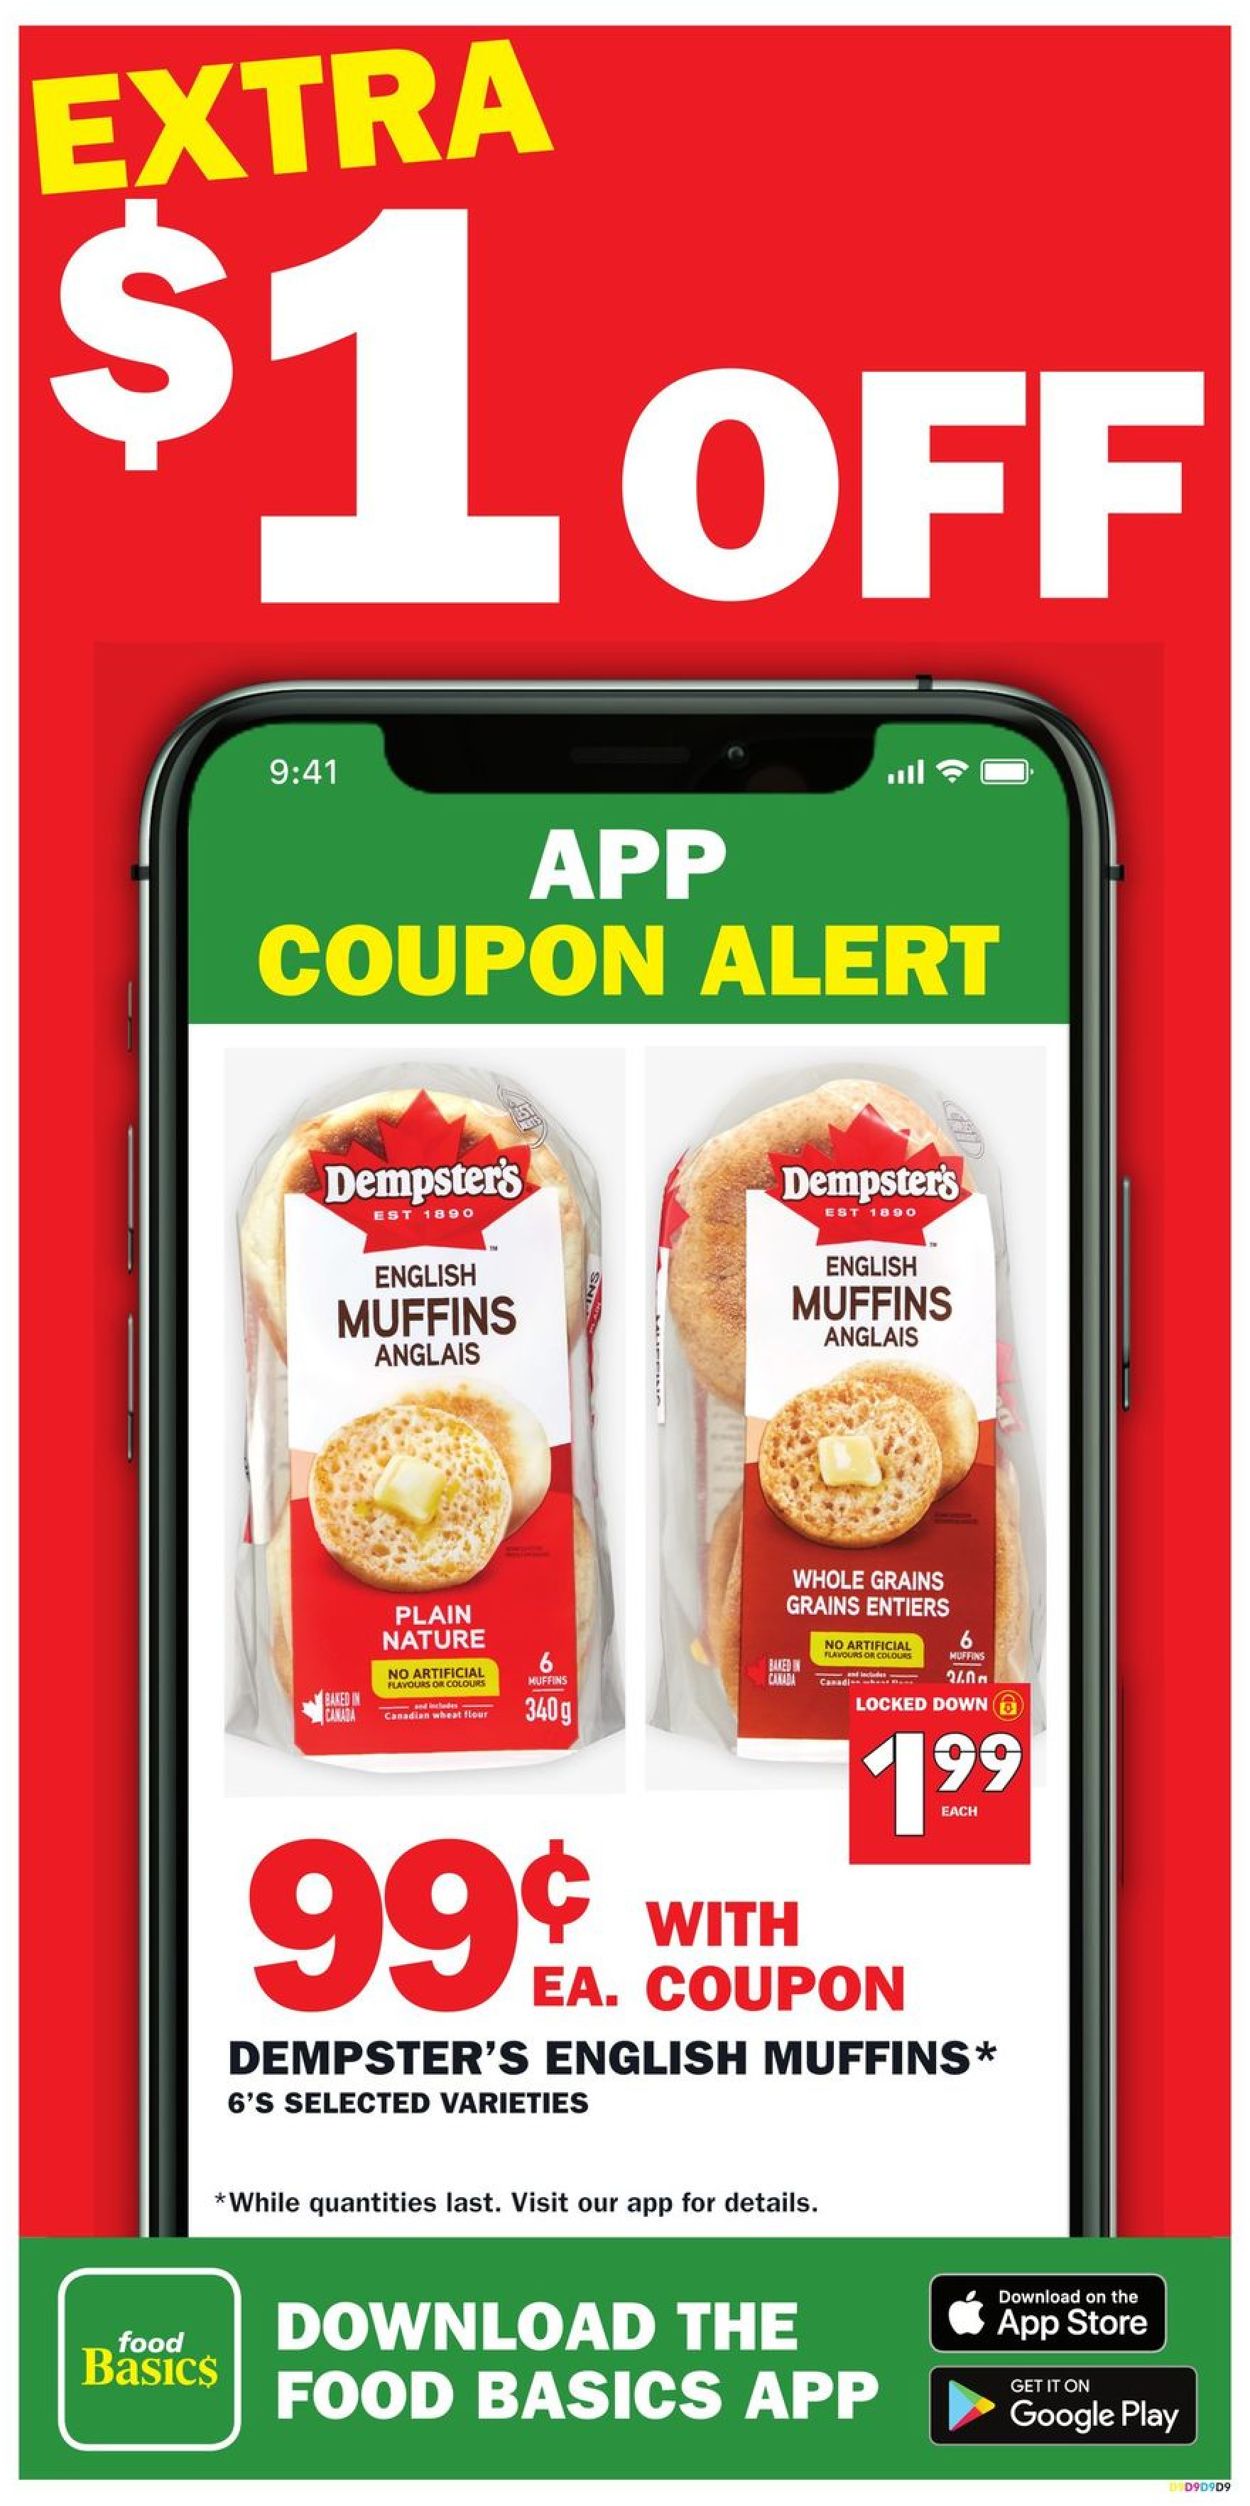 Food Basics Flyer from 03/25/2021